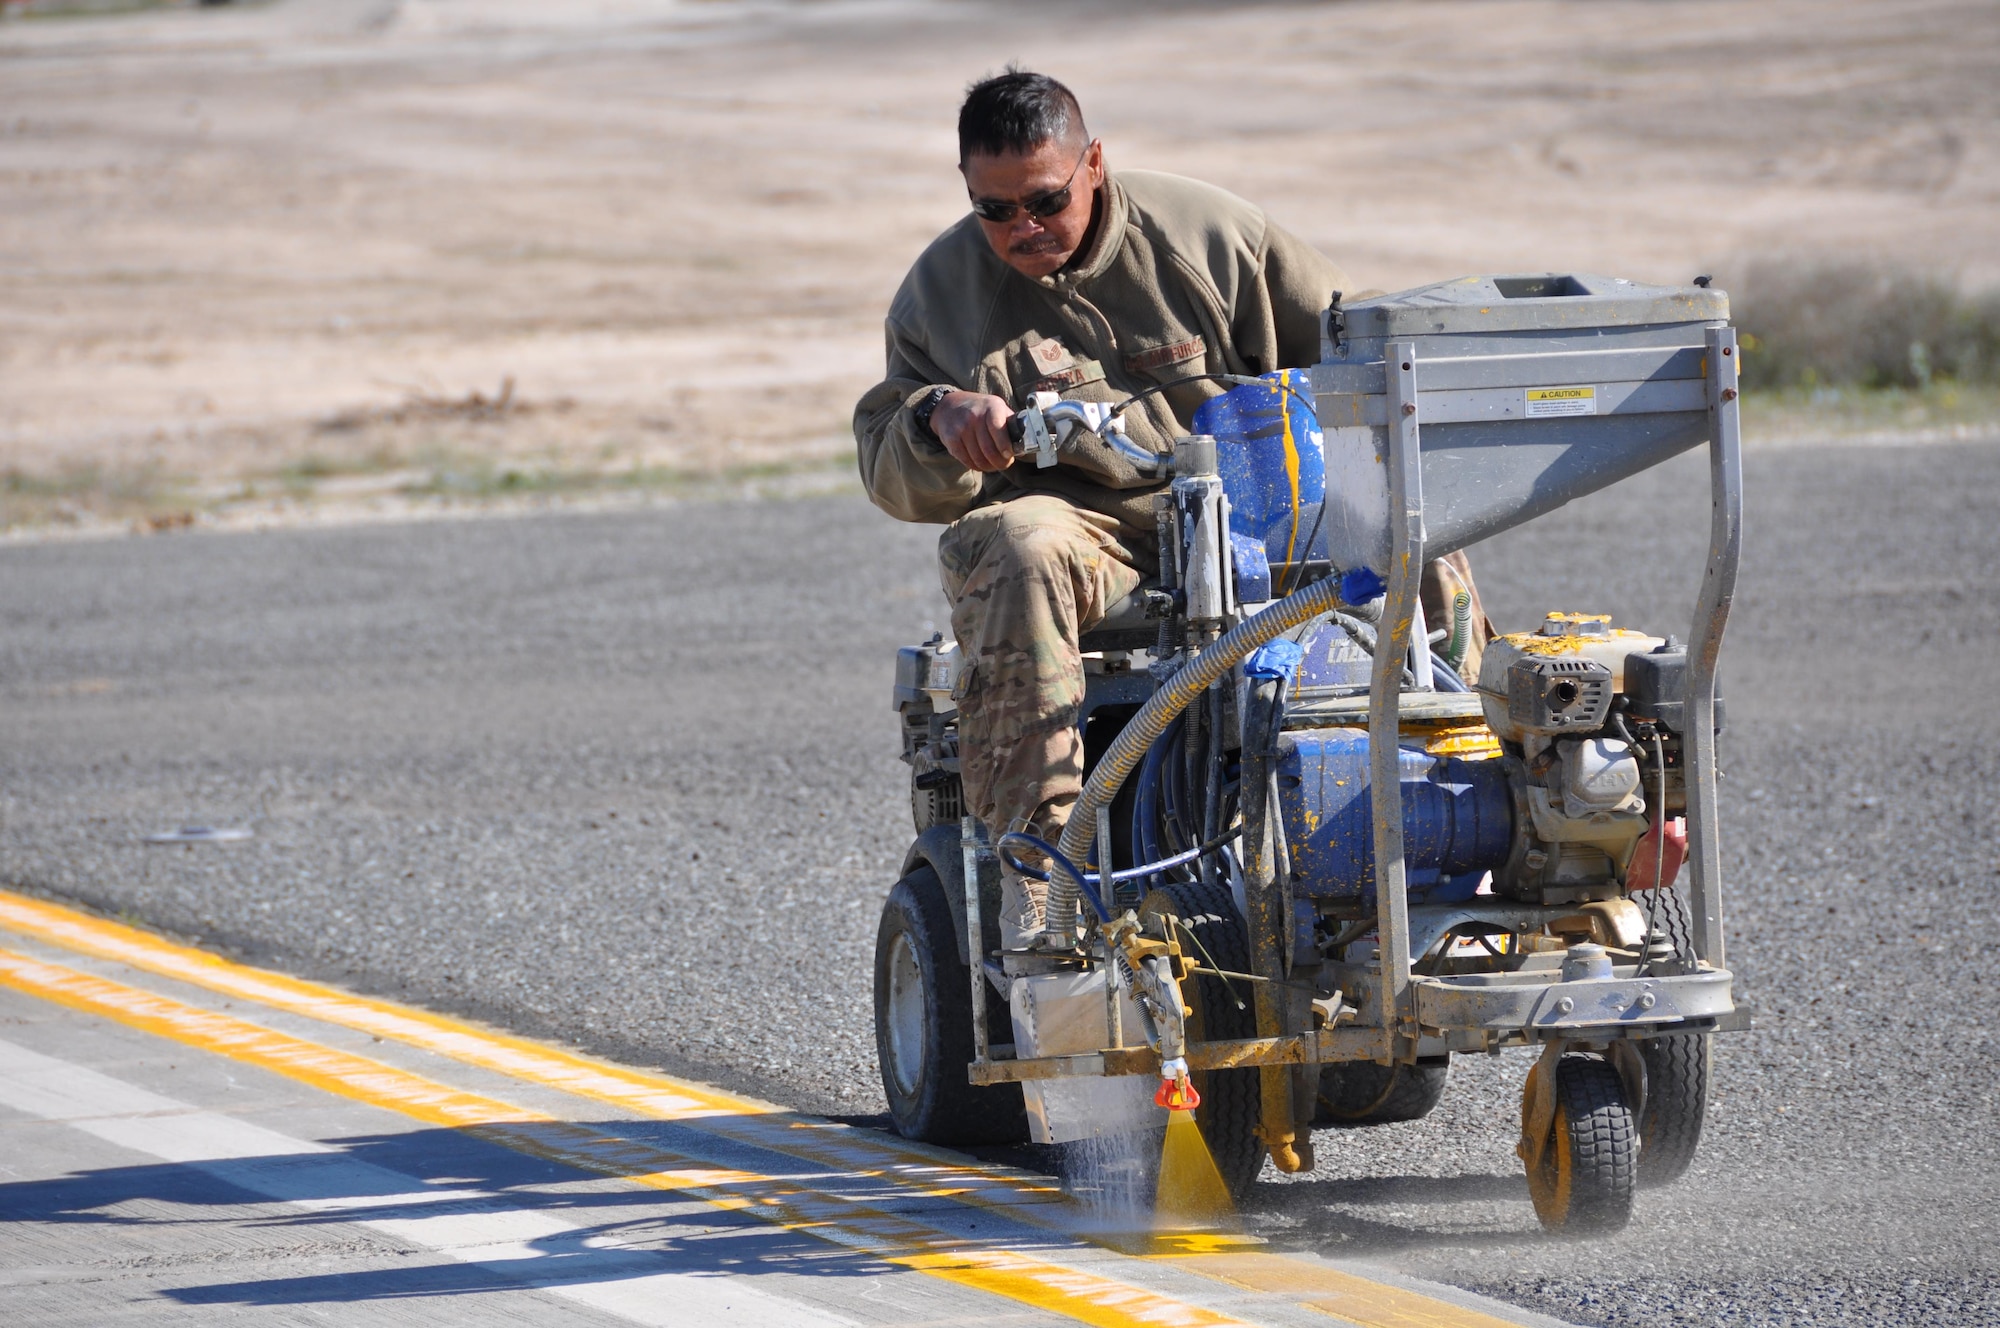 Tech. Sgt. Raymond Gipaya , 1st Expeditionary Civil Engineers Group, applies paint lines to a newly repaved aircraft parking surface at an undisclosed location in Southwest Asia, January 3, 2016.  Members of the 557th Expeditionary Civil Engineers Group, Red Horse, completed the asphalt repaving while members of the 1st ECEG Traveling Paint Team painted the lines.  (U.S. Air Force photo by Master Sgt. Kevin Nichols)